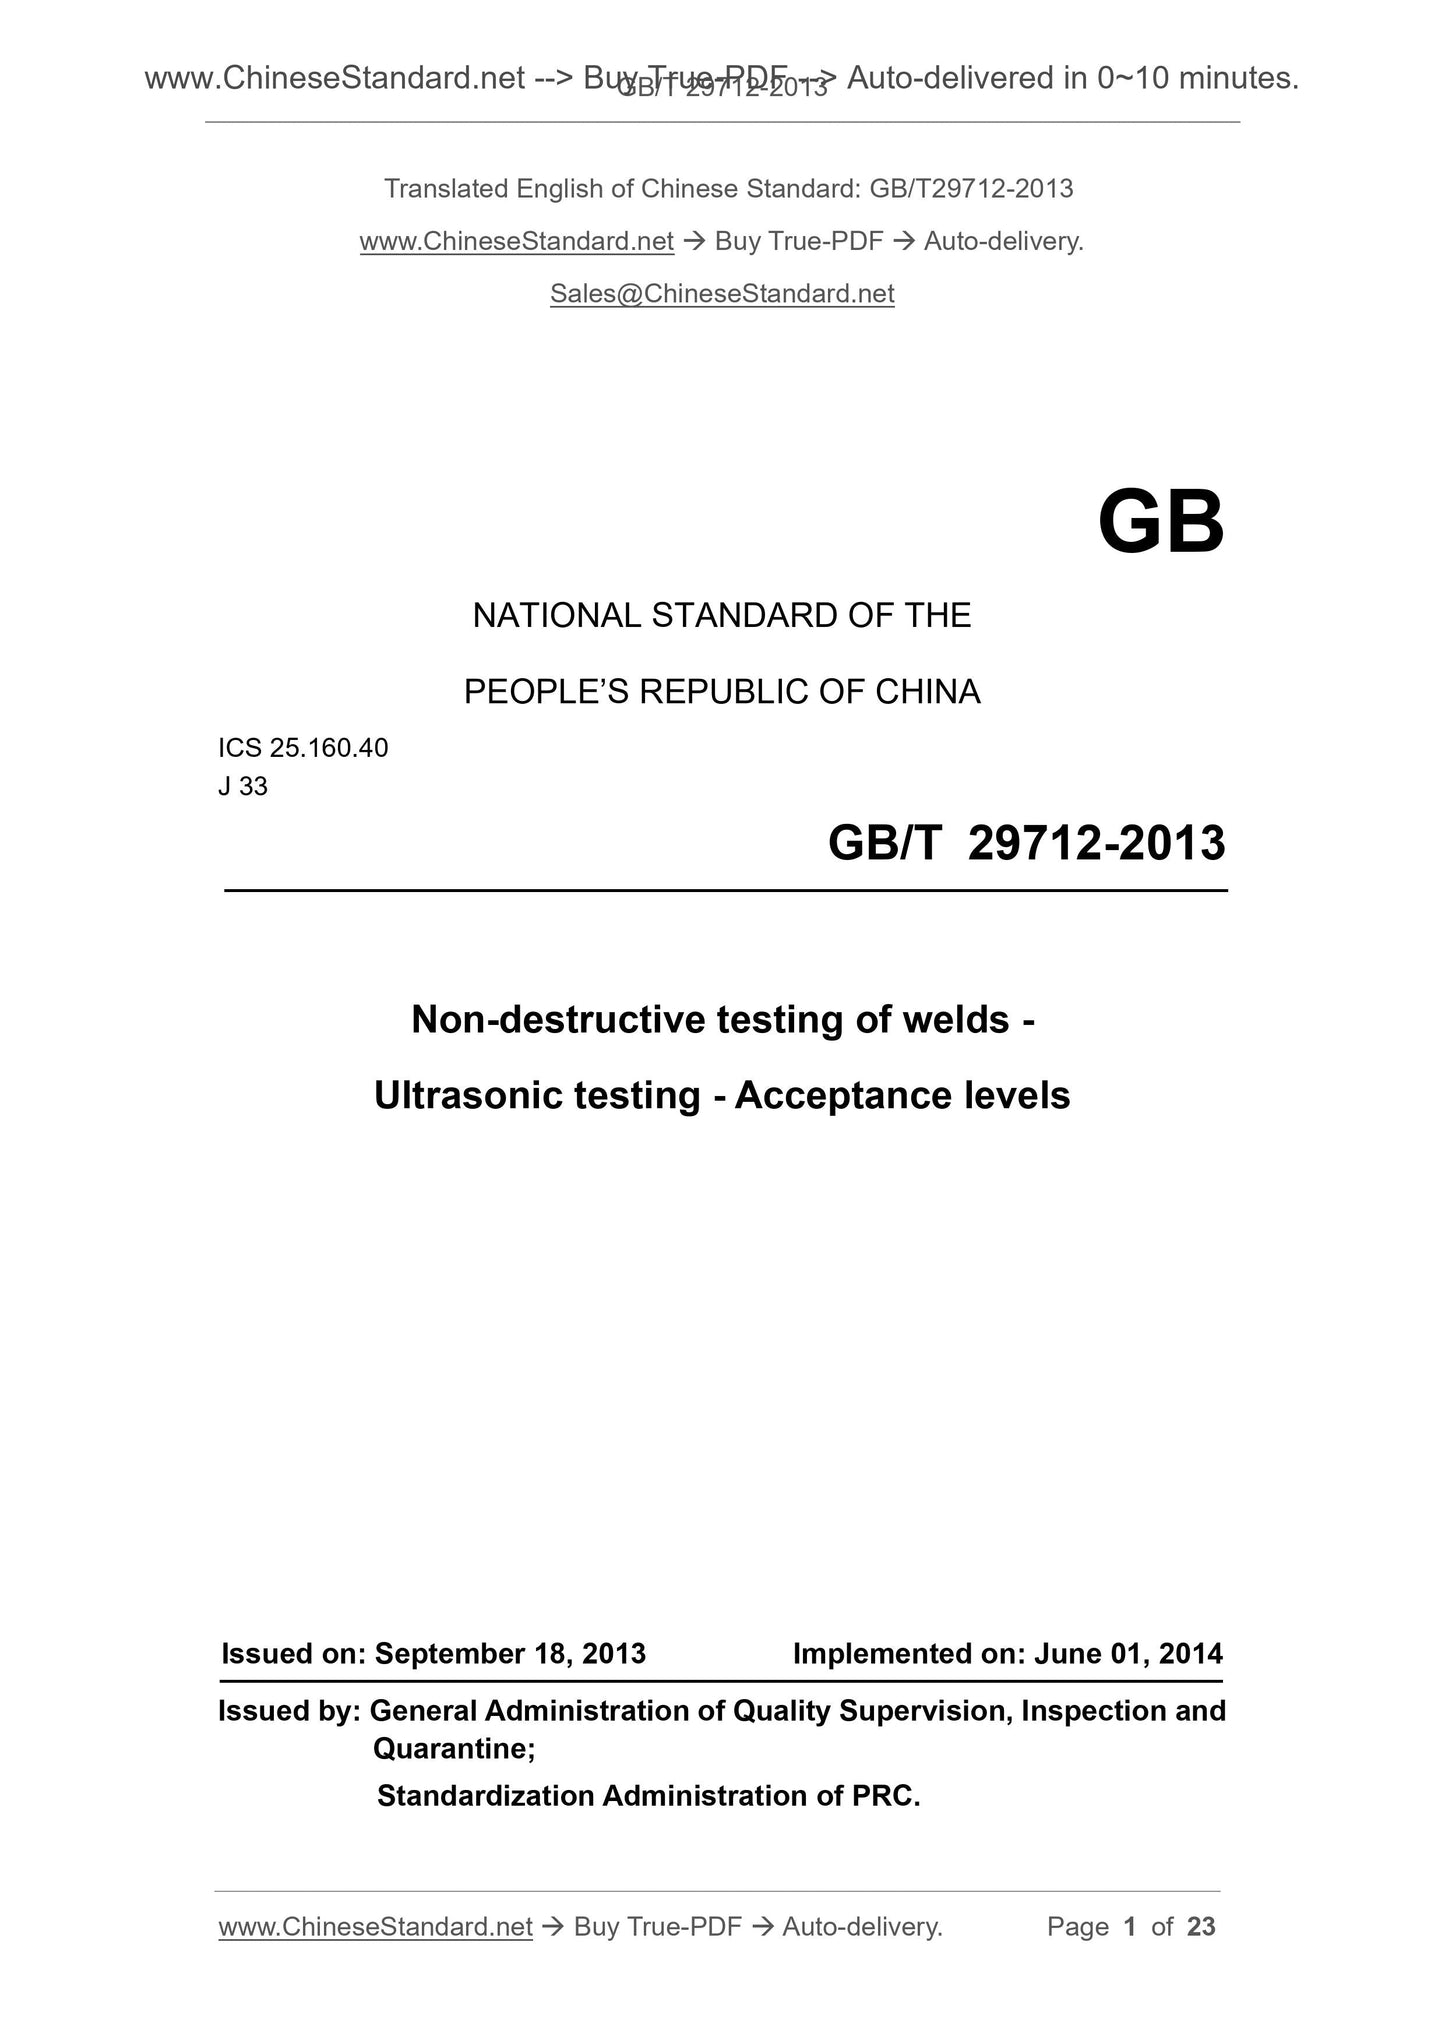 GB/T 29712-2013 Page 1